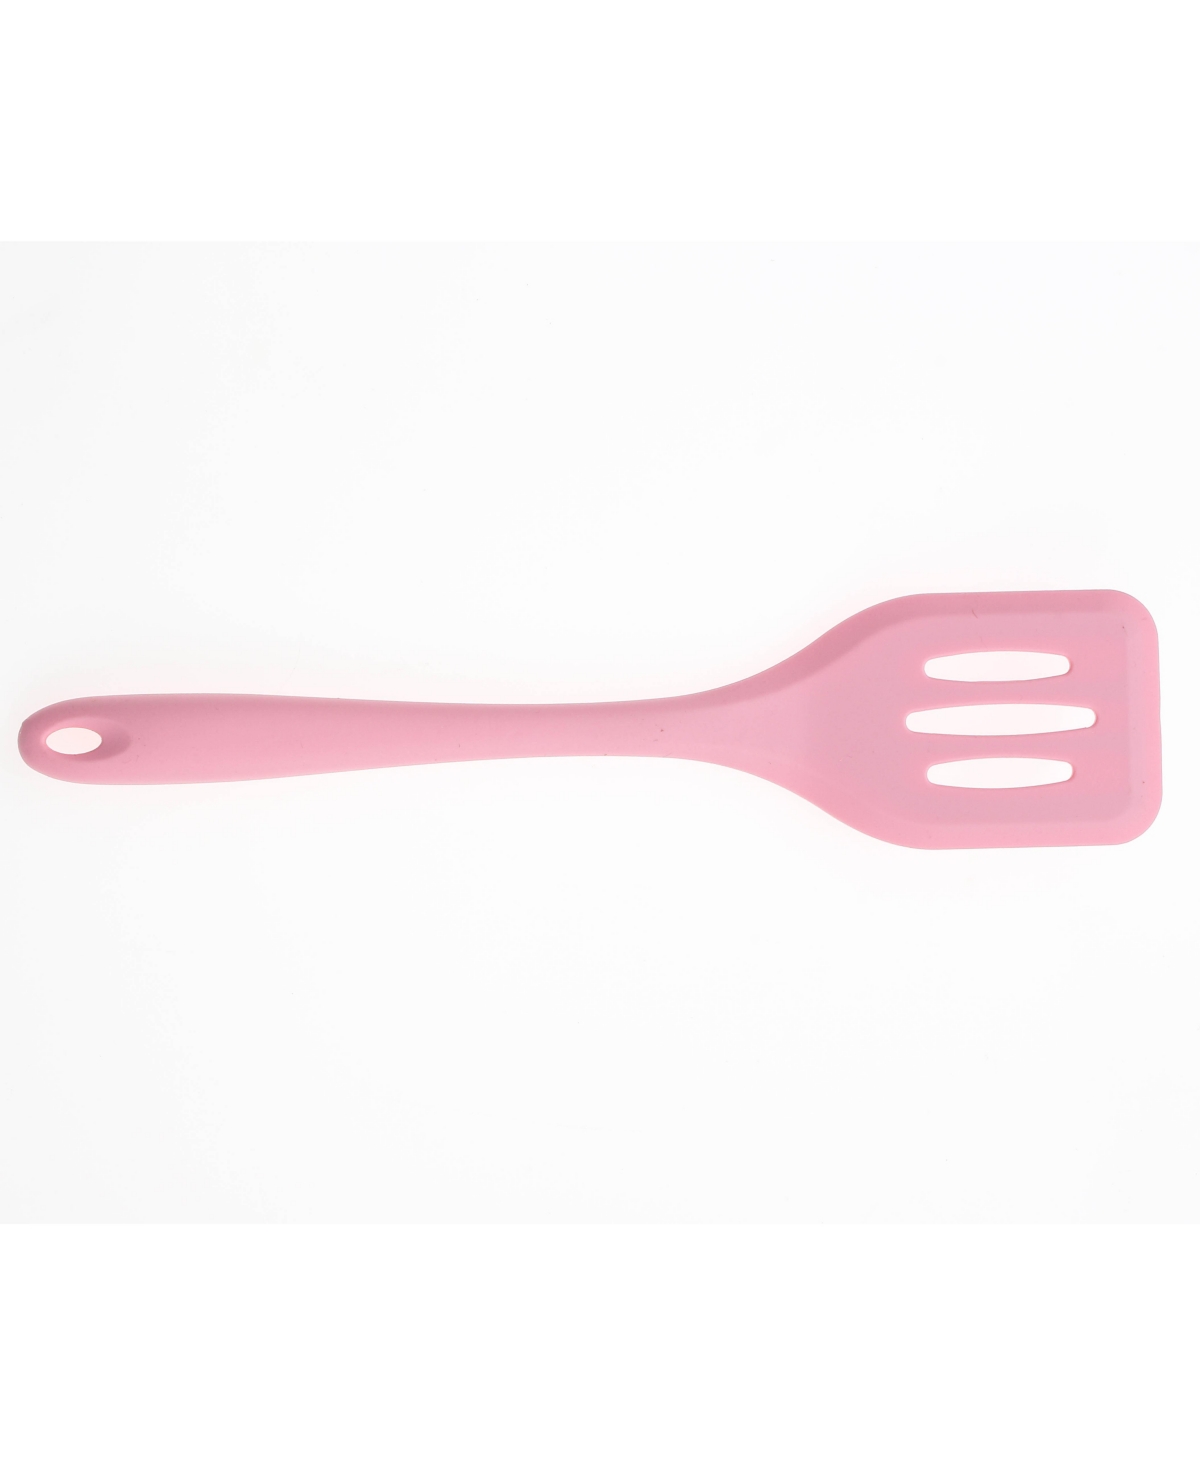 Art & Cook Slotted Turner In Pink